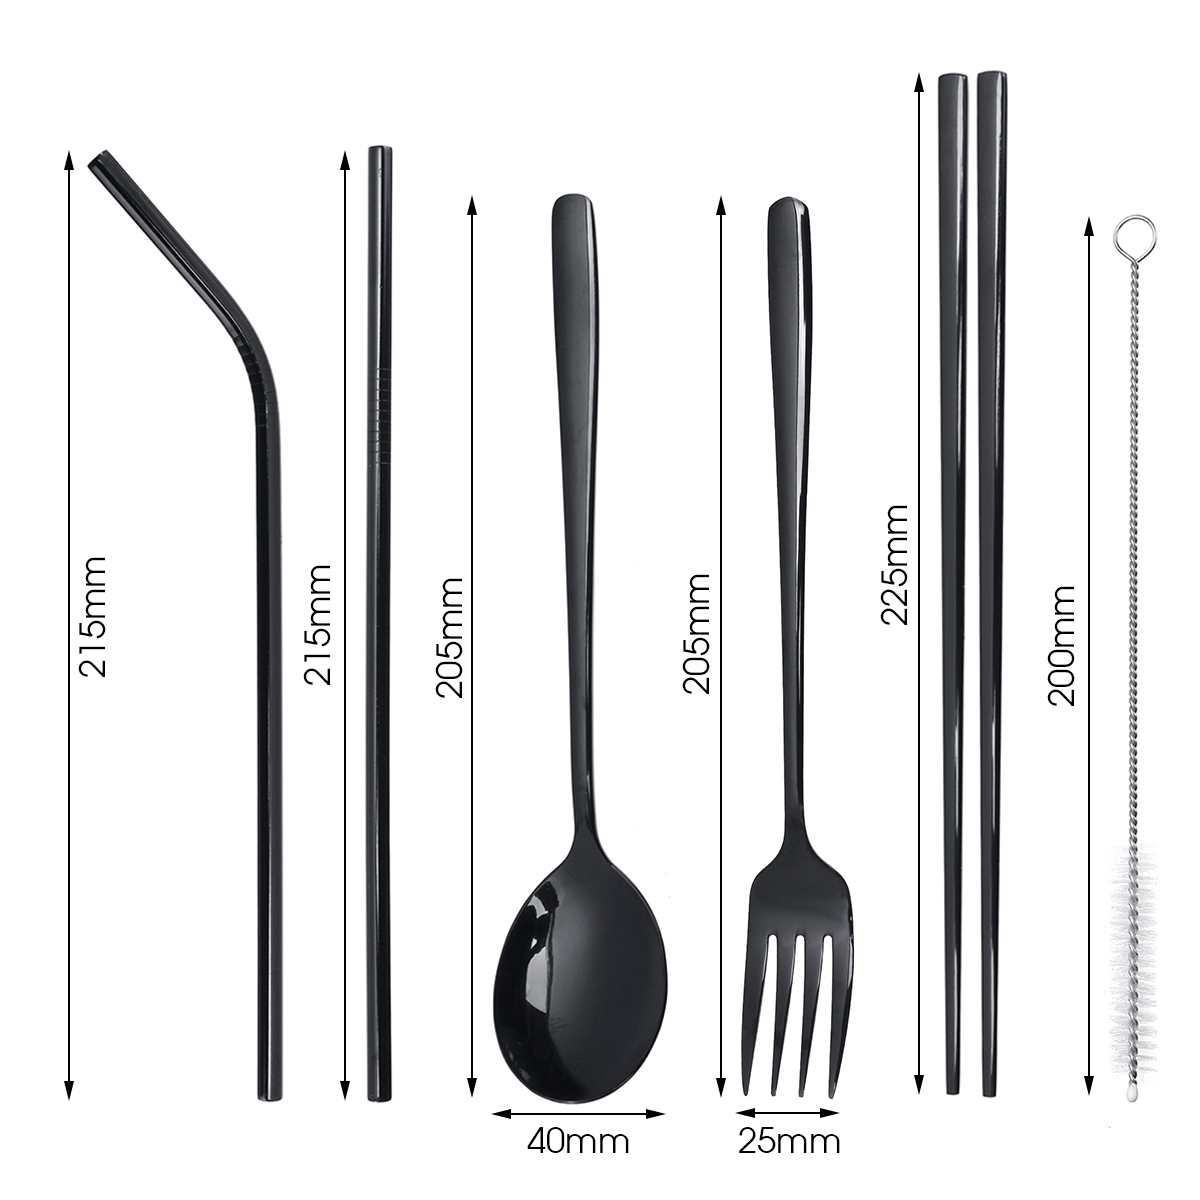 Portable-304-Stainless-Steel-Drinking-Straw-Spoon-Reusable-Straws-Fork-Chopsticks-Brush-Combination--1529584-4